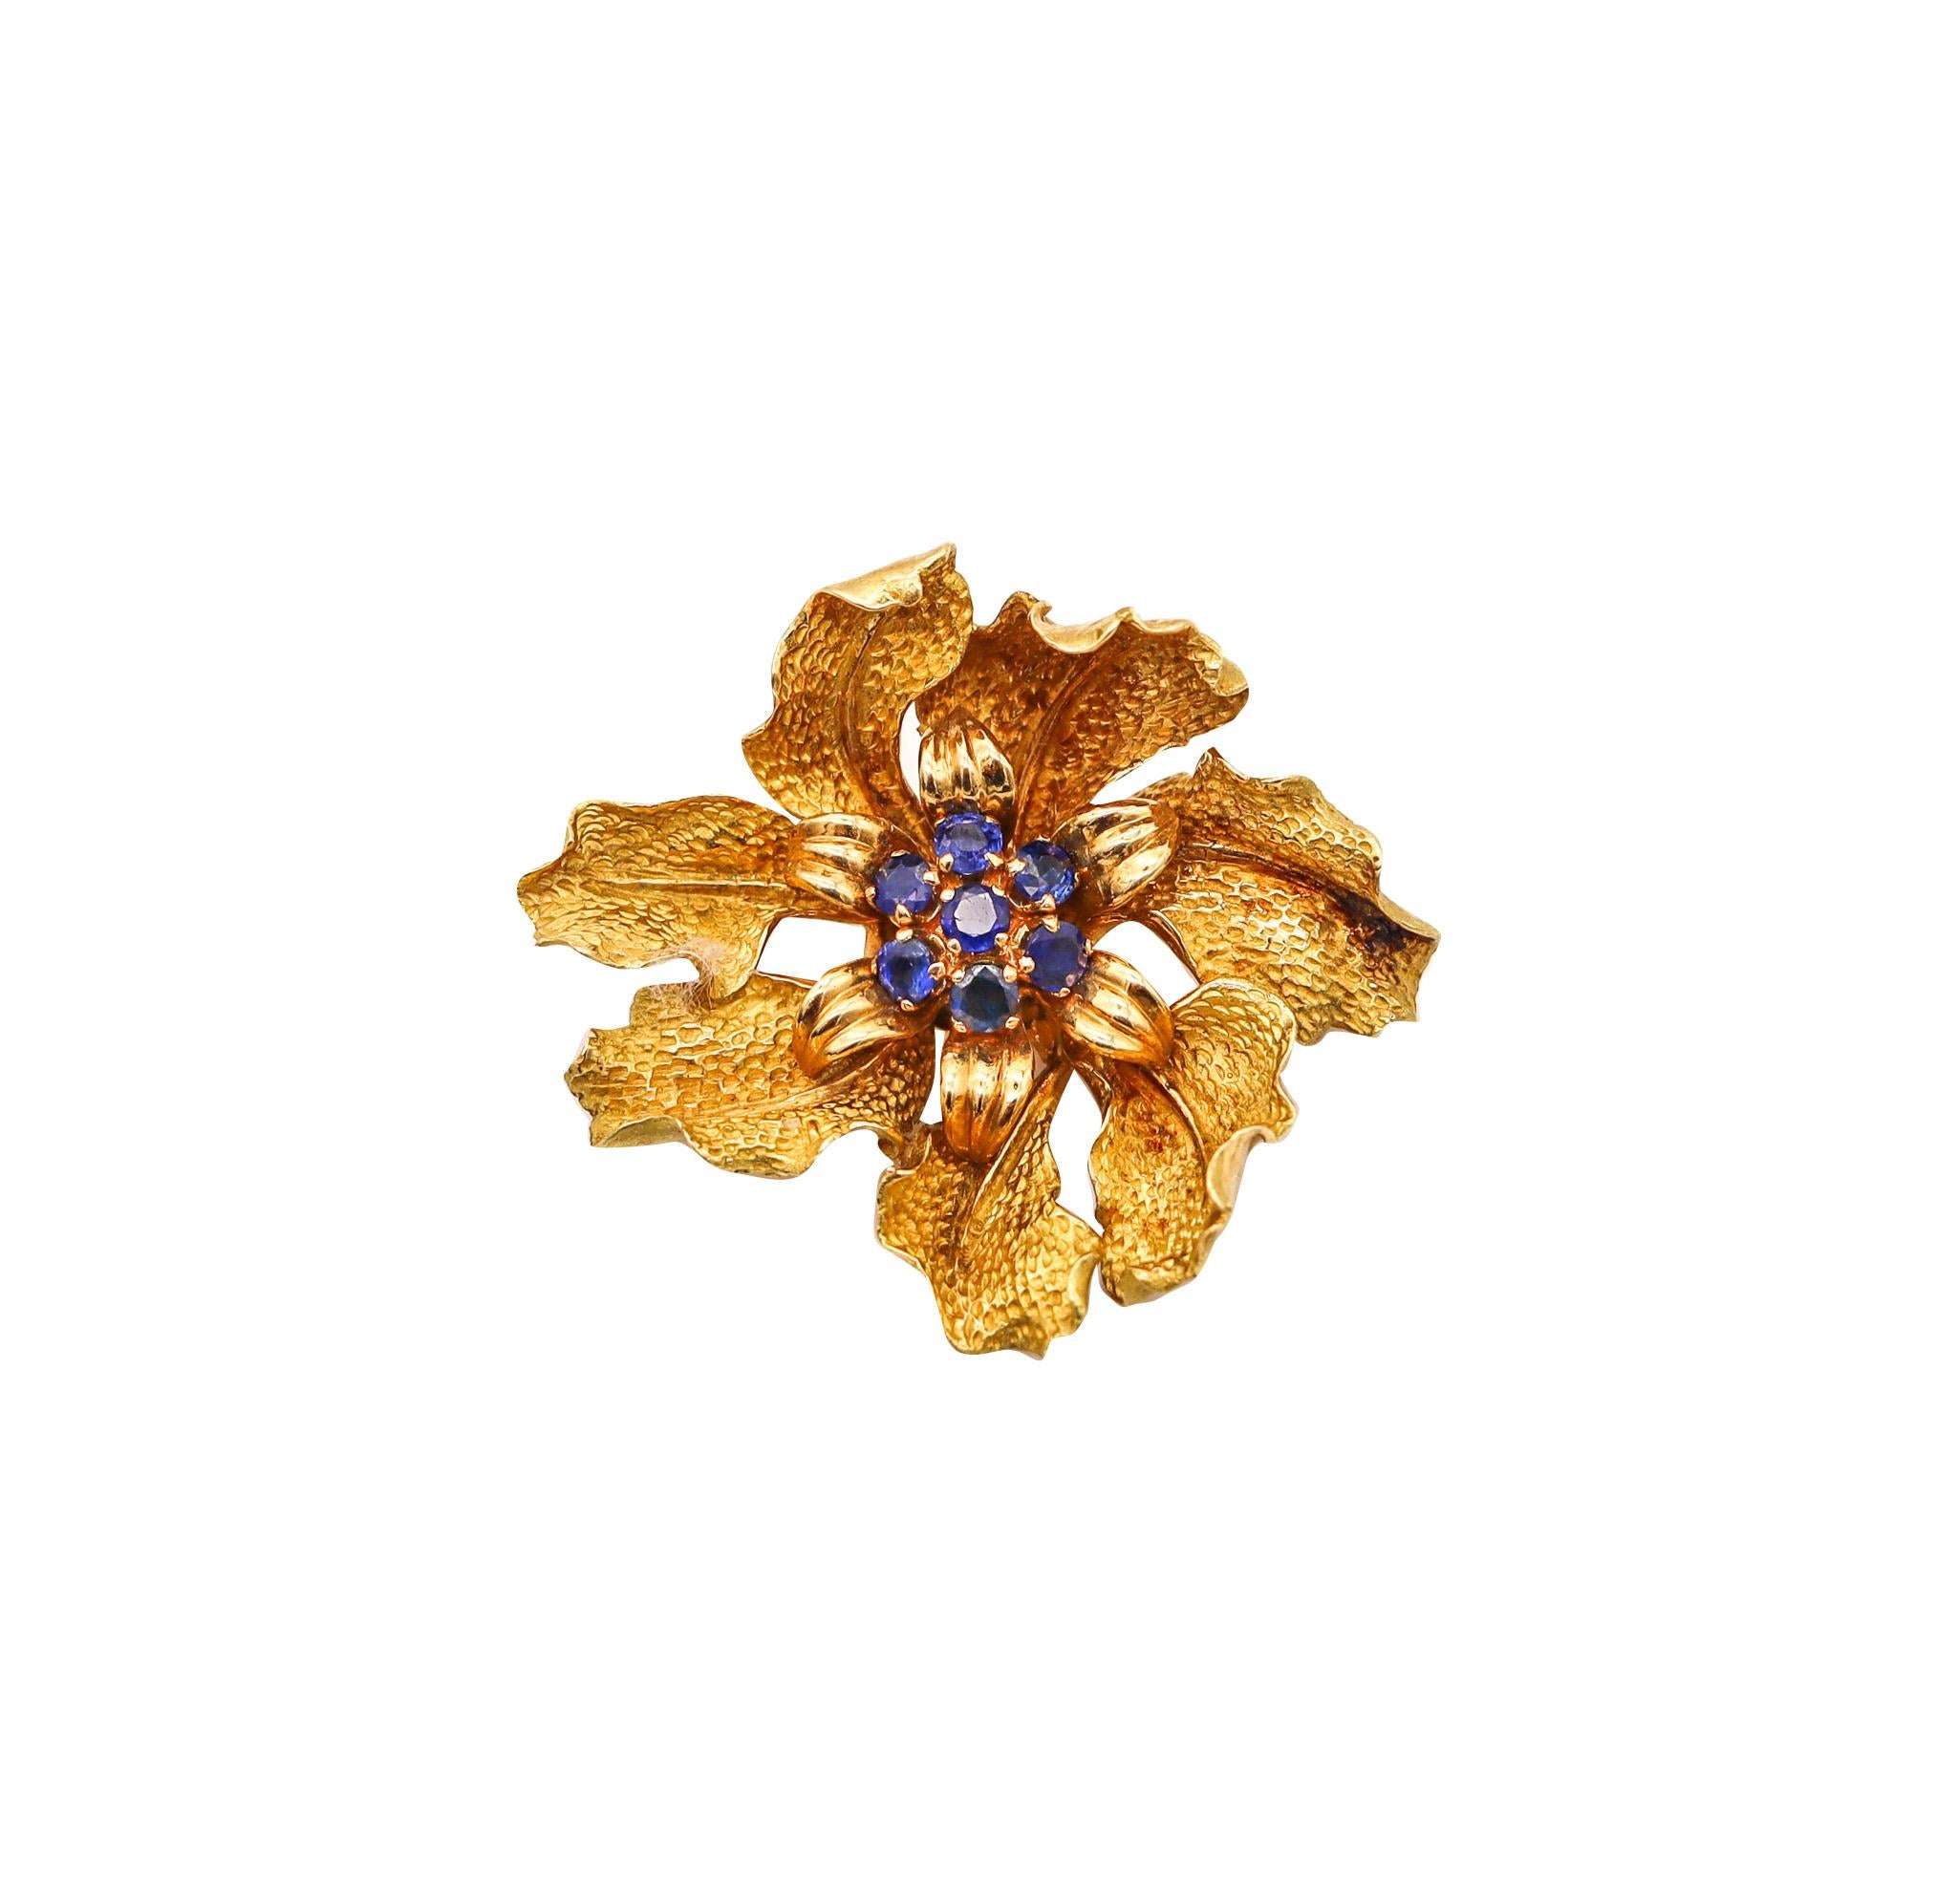 Round Cut Tiffany & Co. 1960 Organic Brooch In 18Kt Yellow Gold With 1.26 Ctw In Sapphires